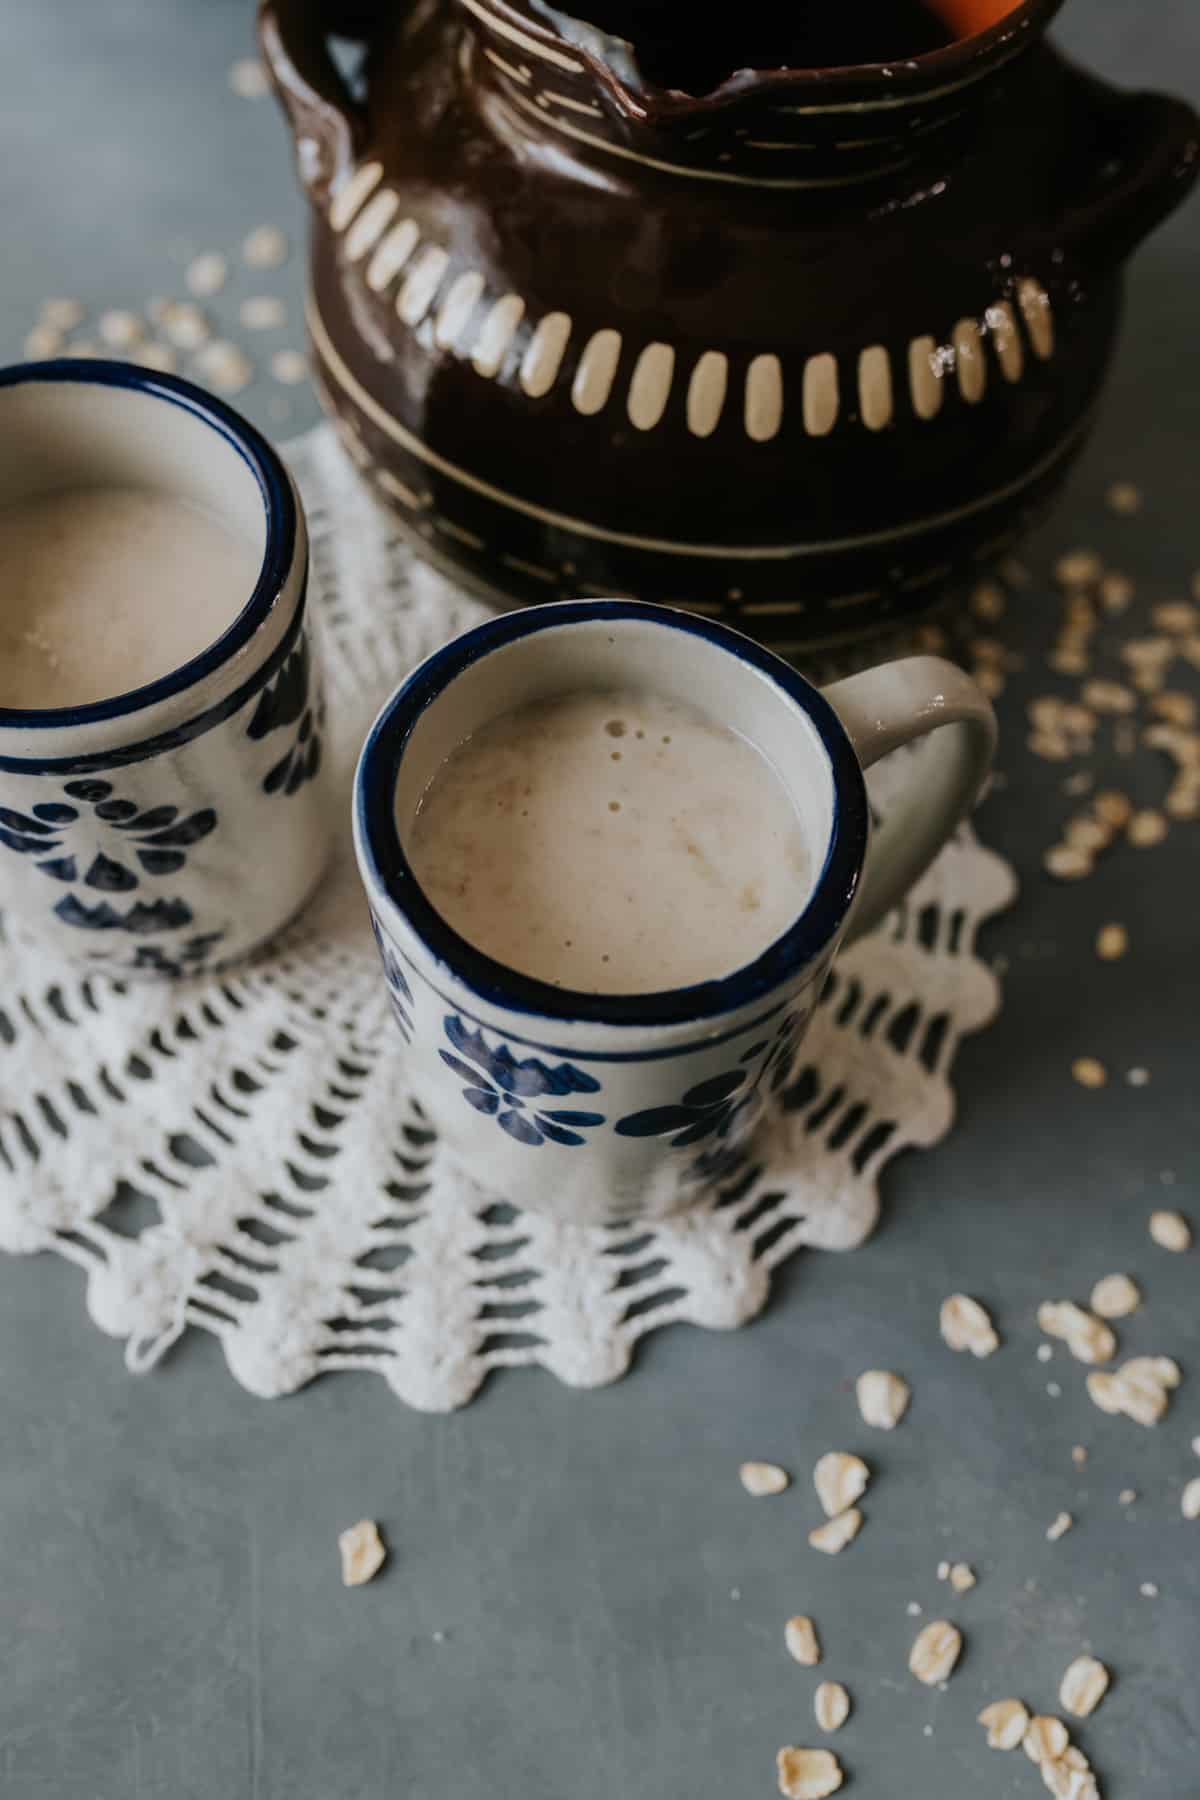 Atole de Avena in two Mexican blue and white cups with a doily and cazuela